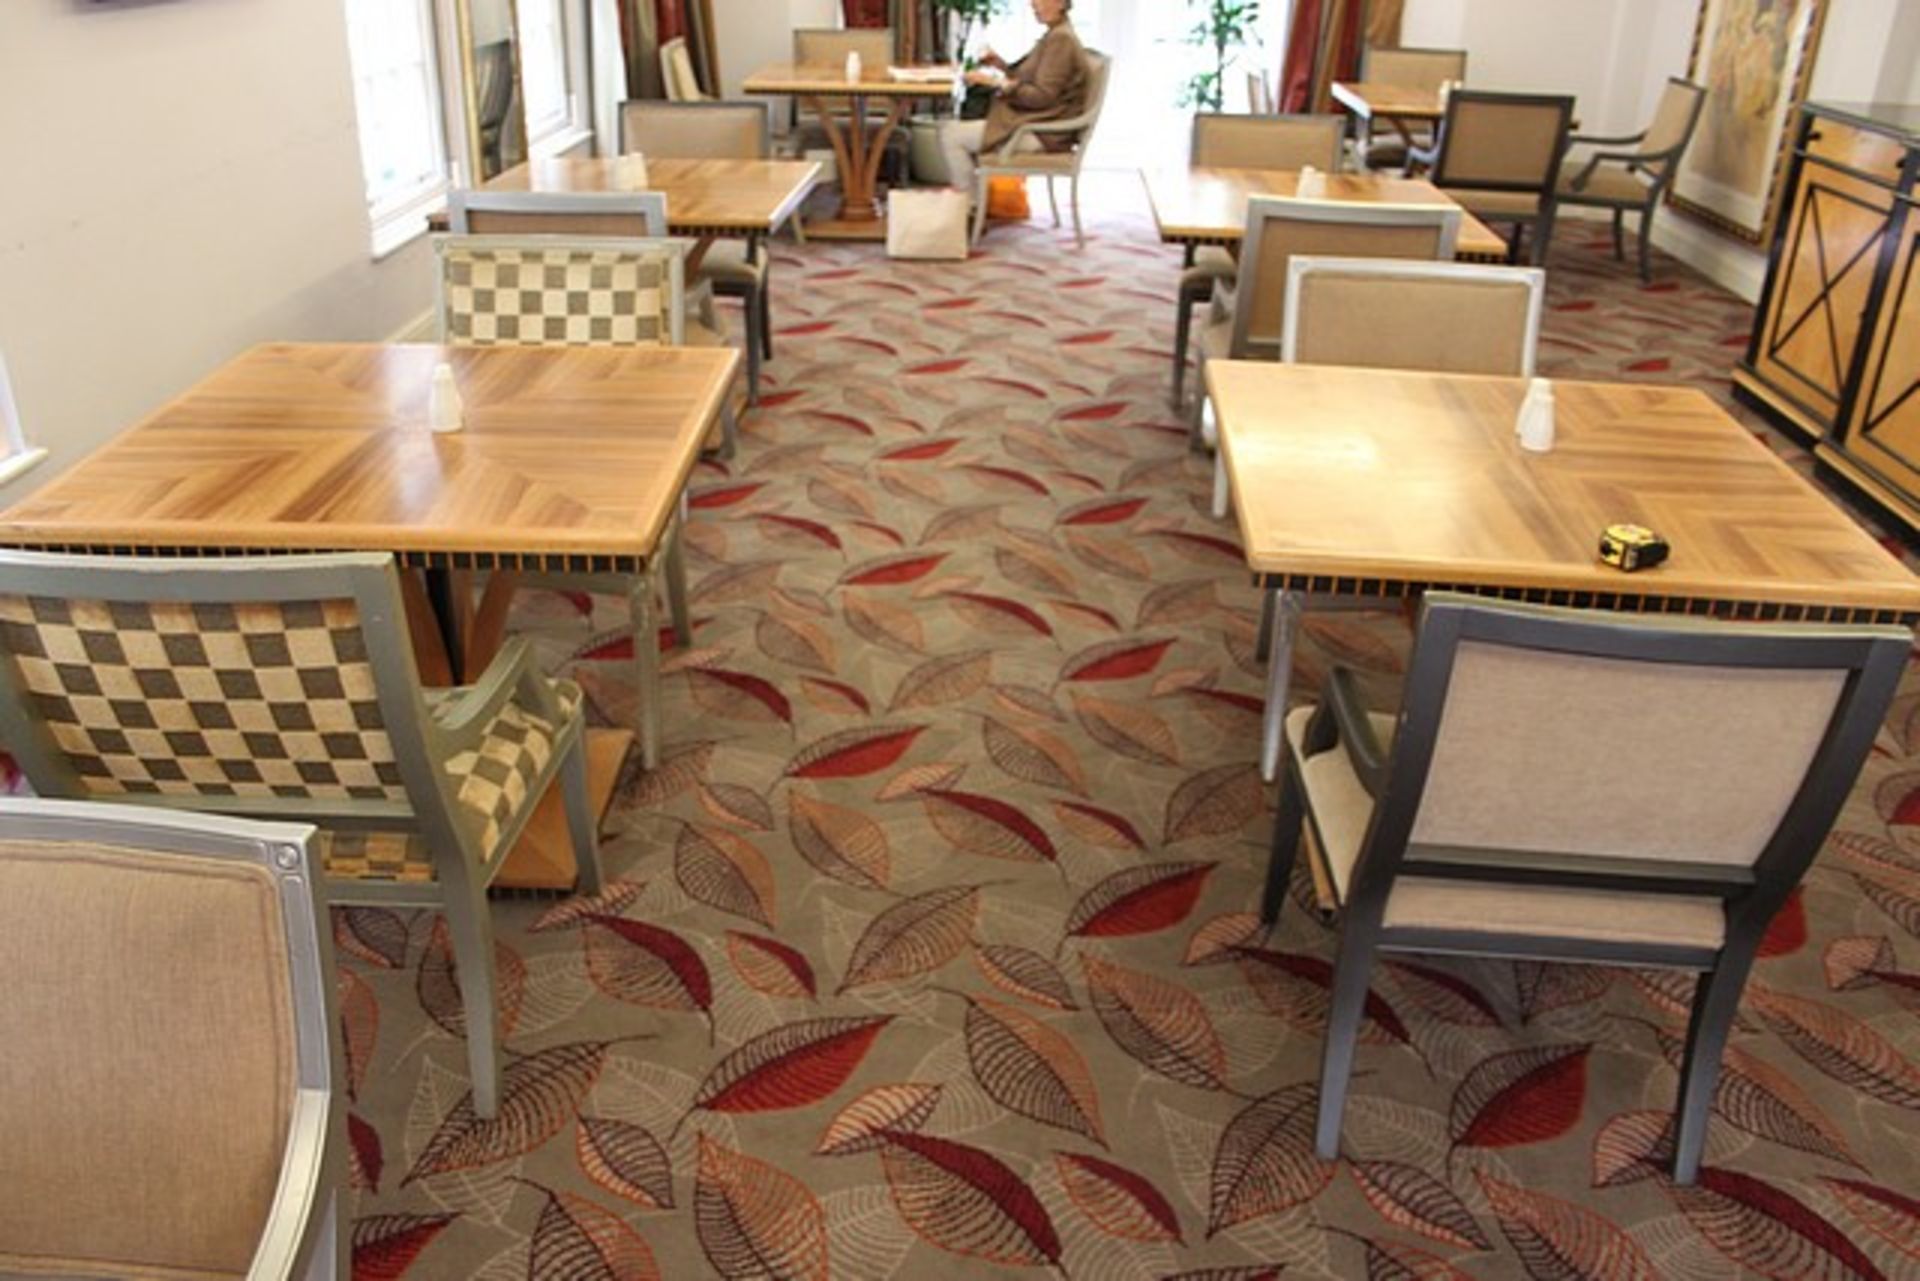 Commercial heavy duty mixed carpet with a tonal repeating leaf pattern approximately 11m x 5m - Image 2 of 2